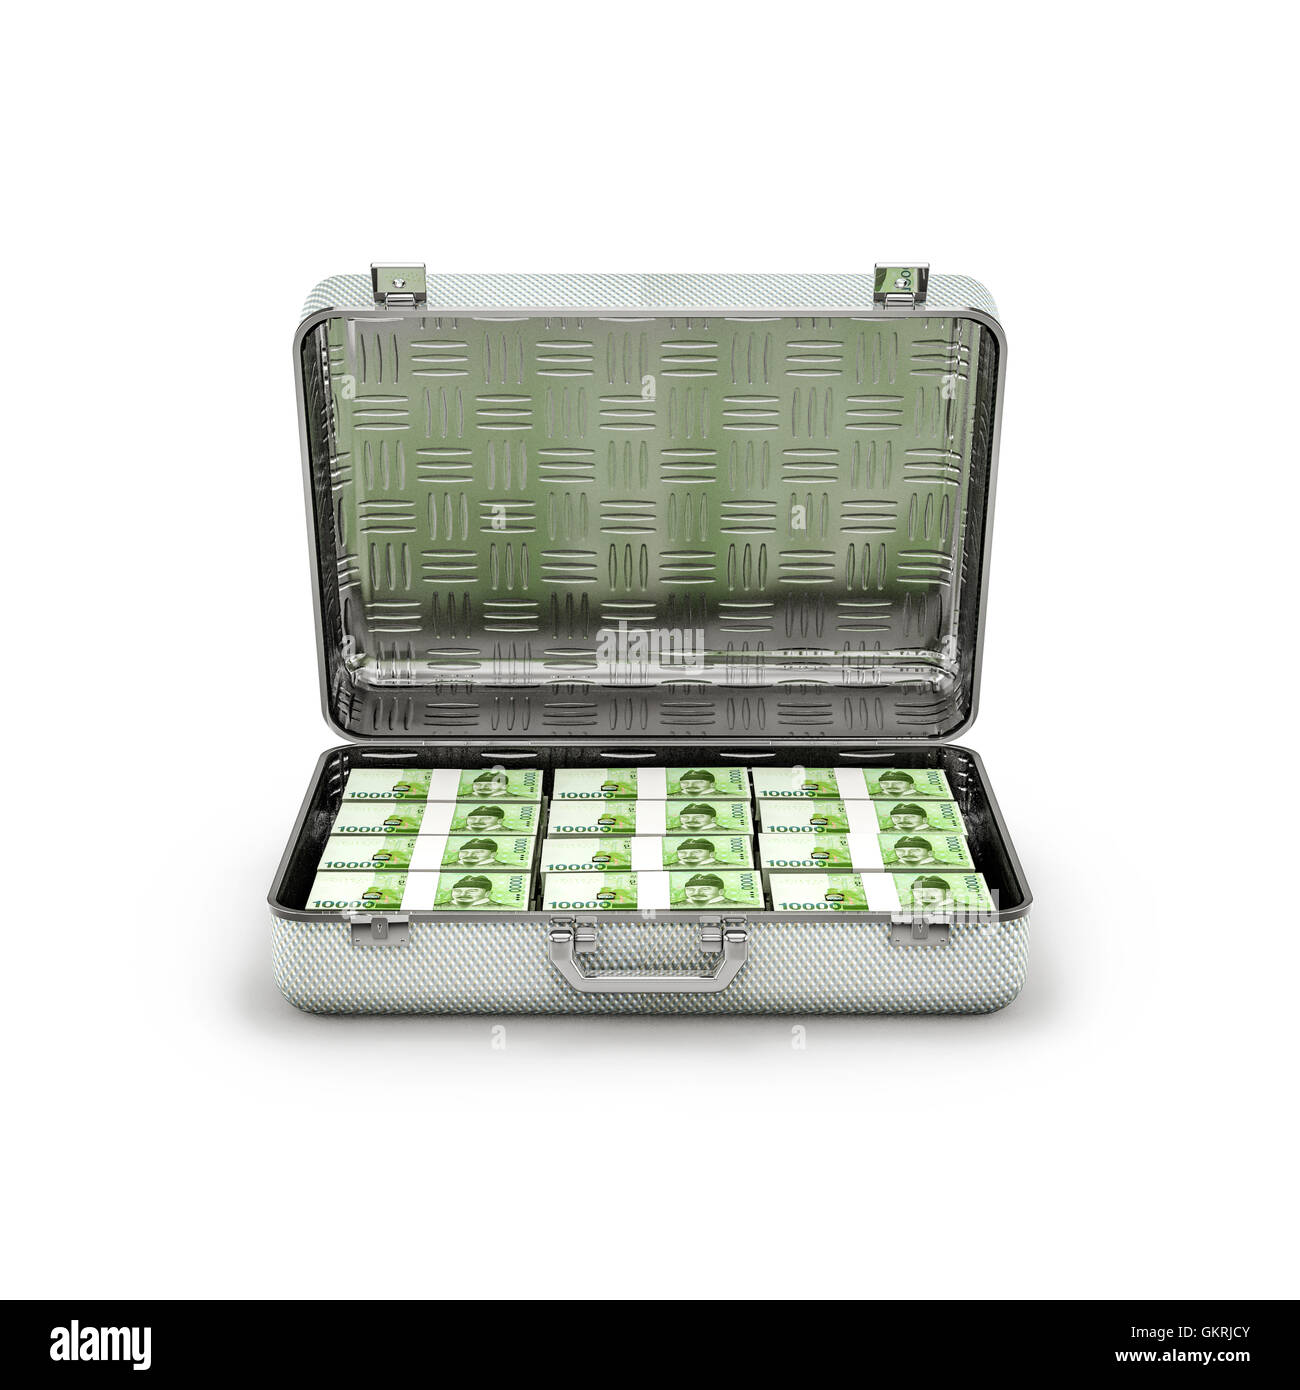 Briefcase ransom South Korean won / 3D illustration of stacks of South Korean ten thousand won notes inside metal briefcase Stock Photo